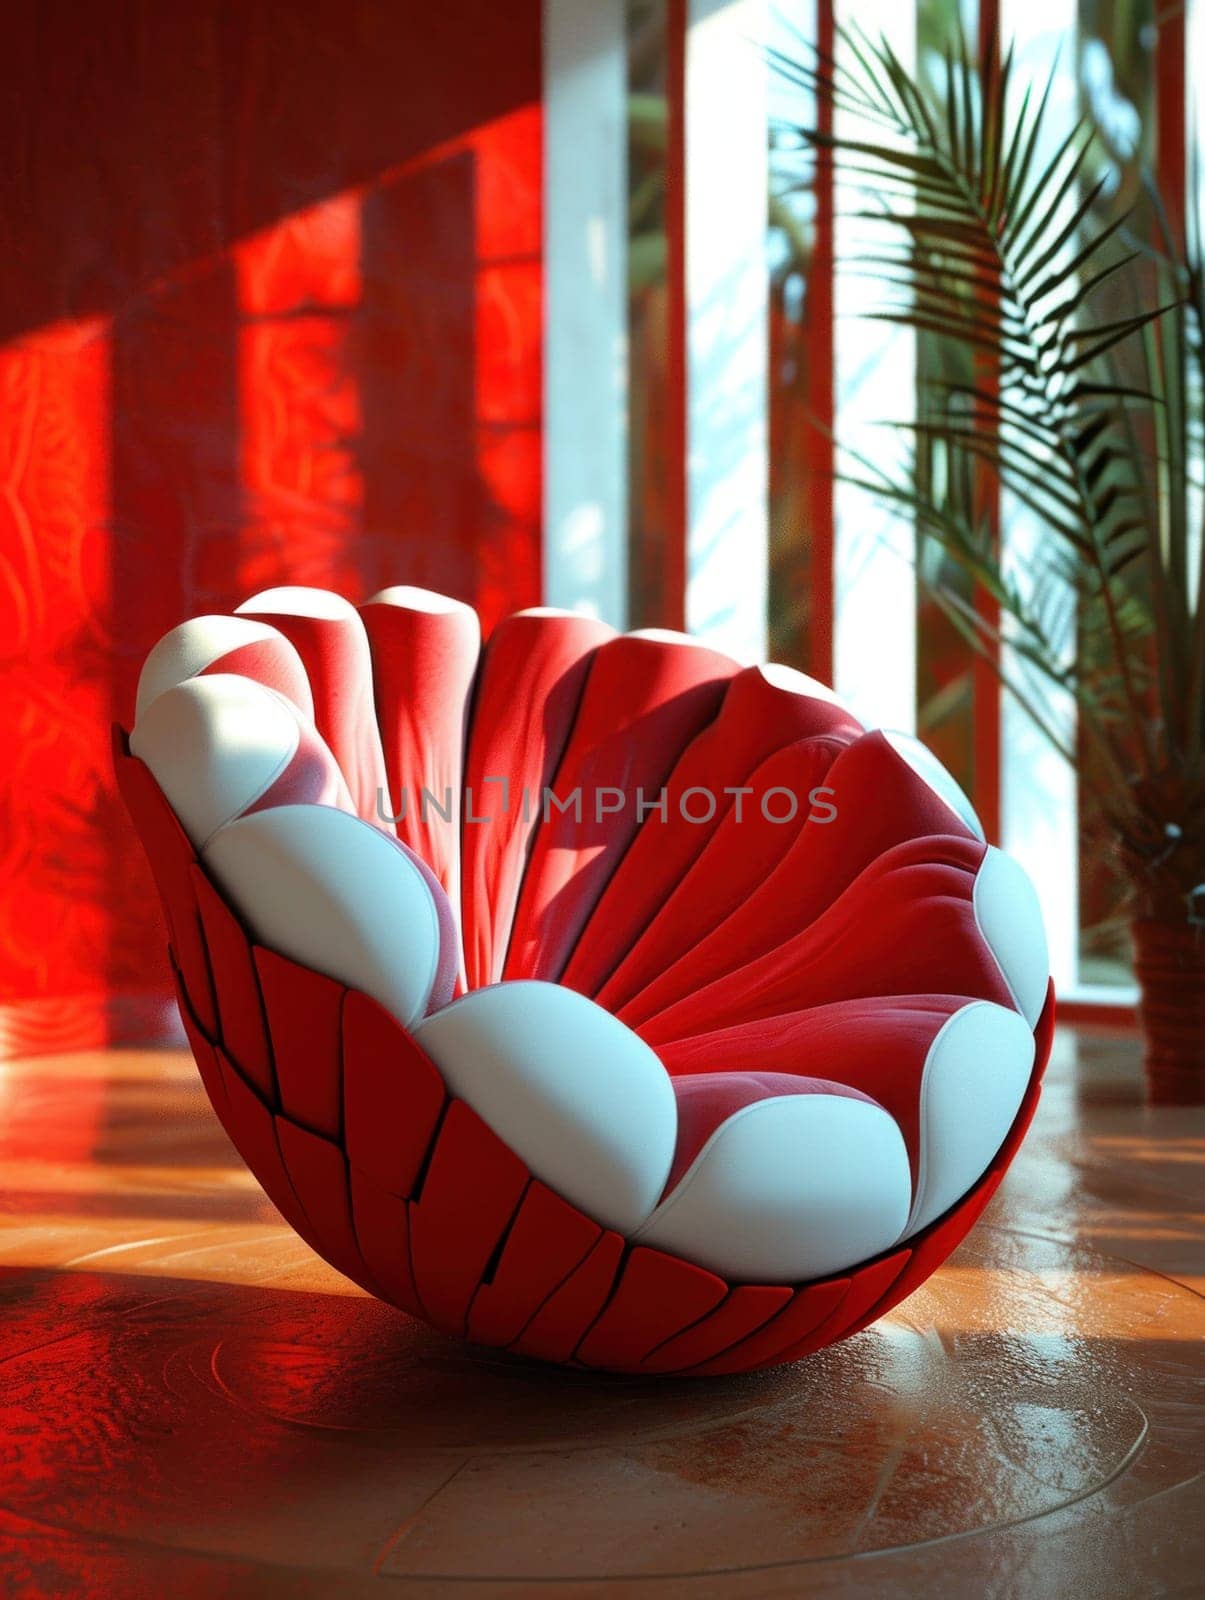 A red and white bowl sitting on a floor next to some plants